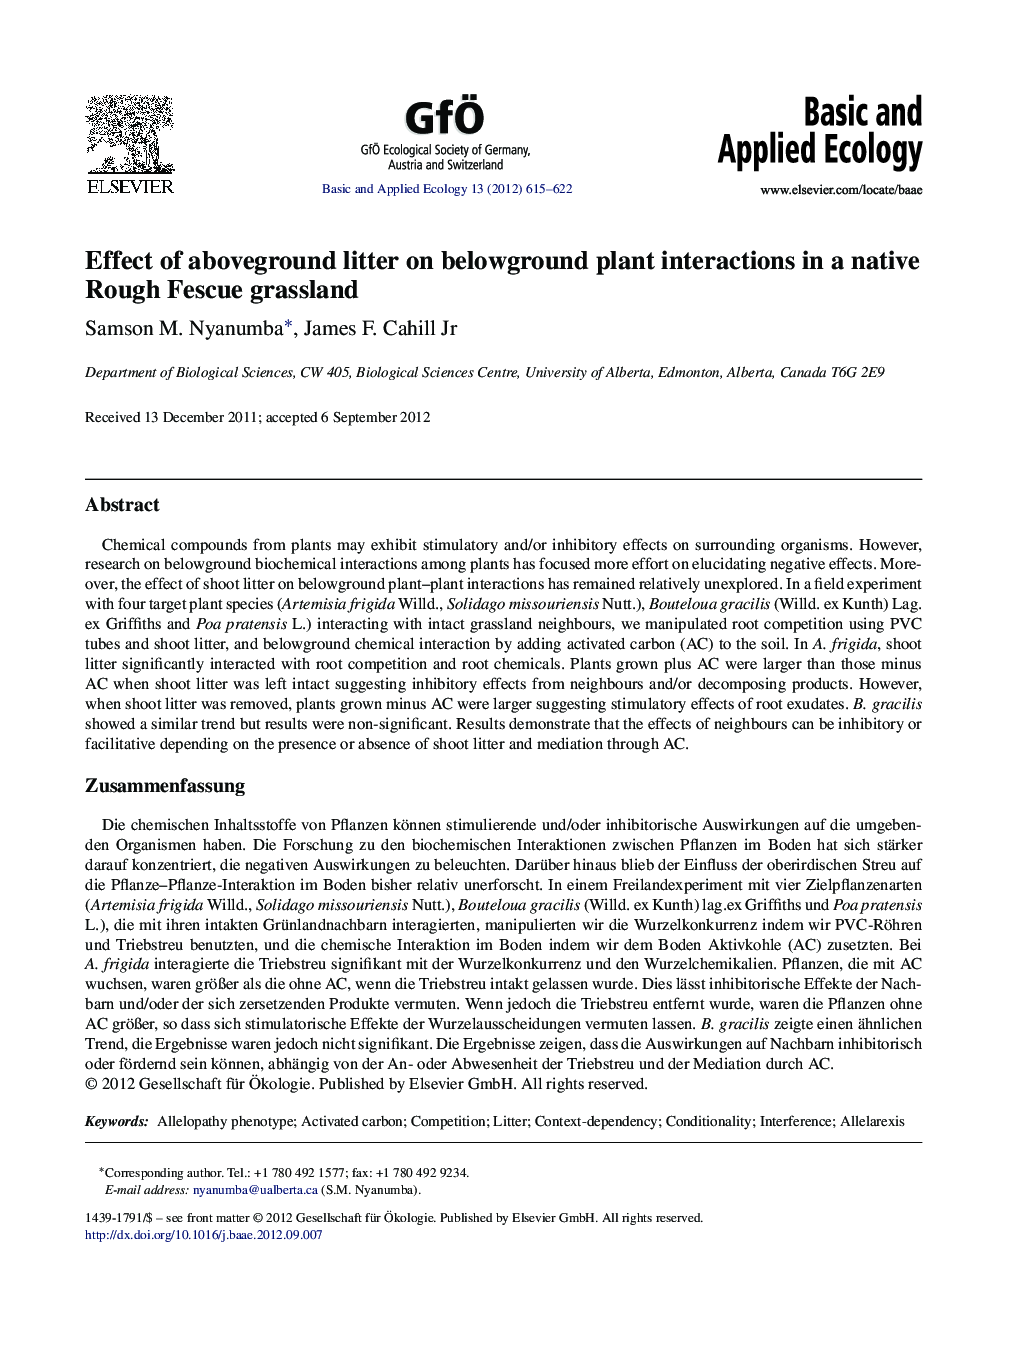 Effect of aboveground litter on belowground plant interactions in a native Rough Fescue grassland